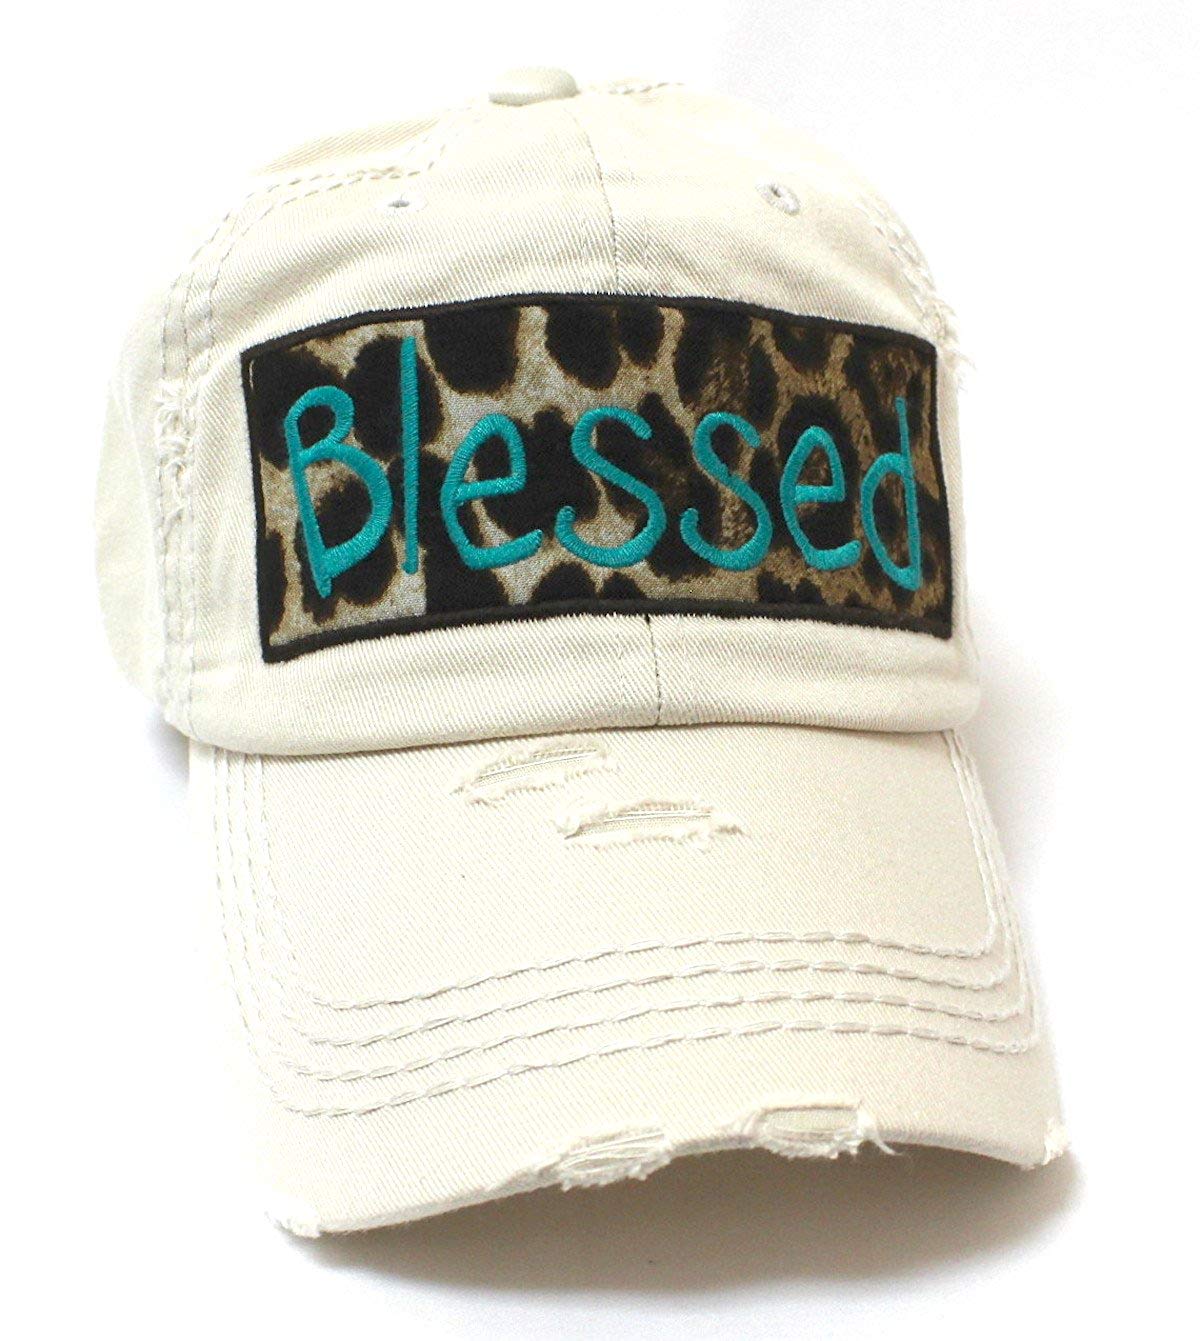 CAPS 'N VINTAGE Stone Ivory Blessed Leopard Patch Embroidery Hat - Caps 'N Vintage 